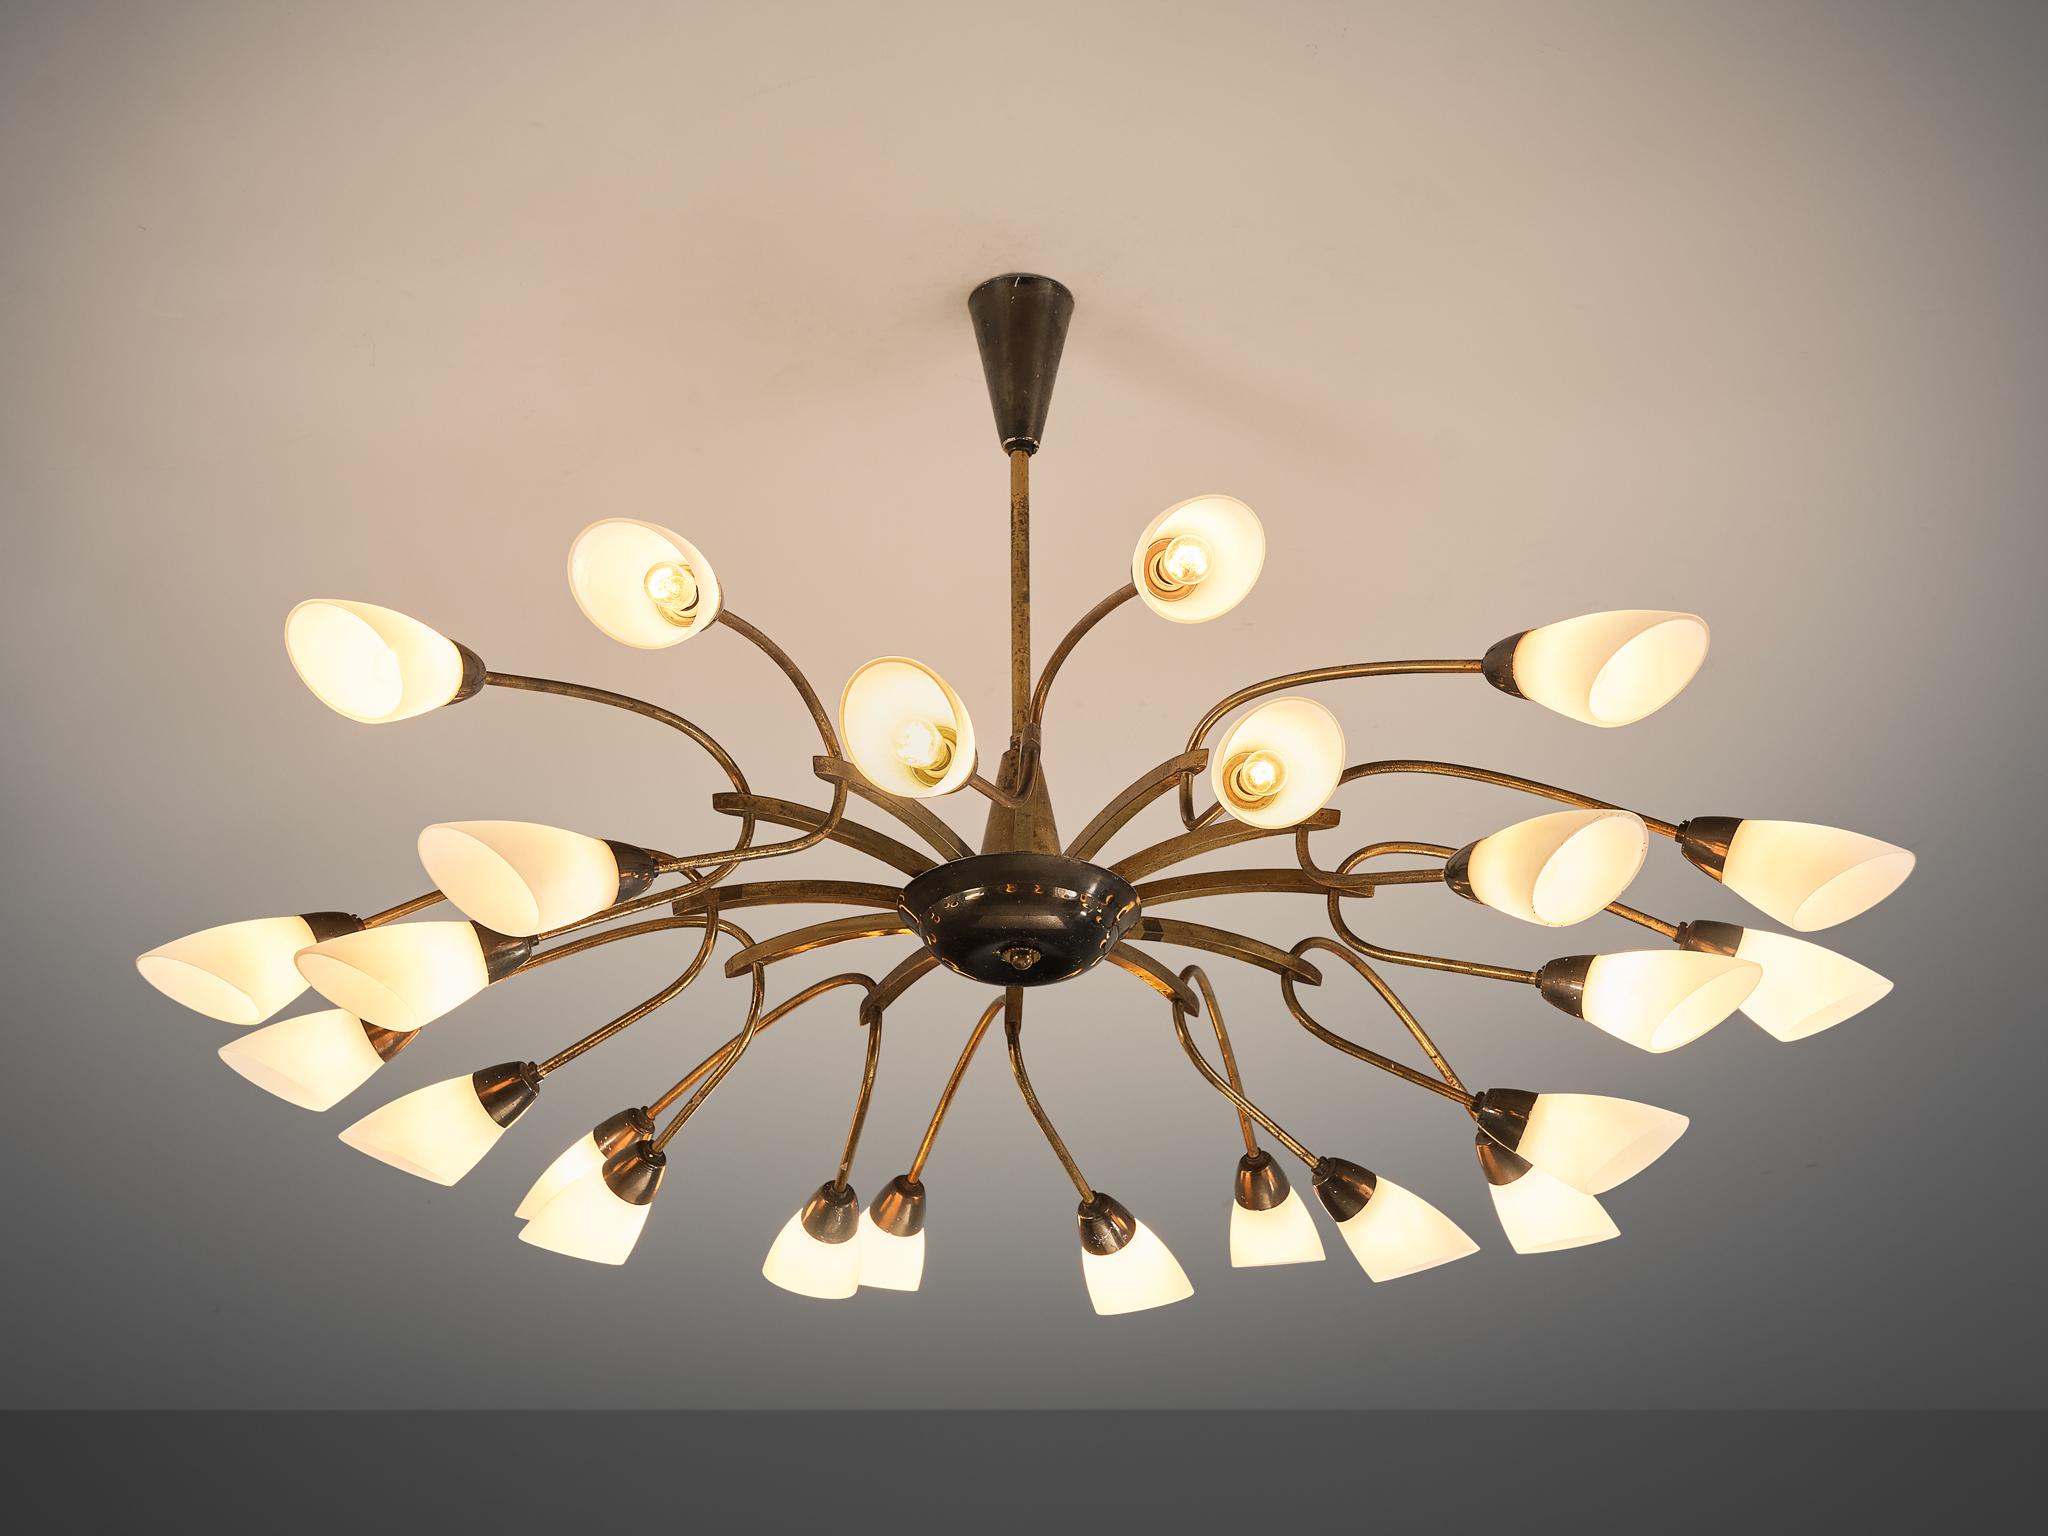 Chandelier, brass, glass, Italy, 1950s

Crafted in Italy, this chandelier exudes an unmatched elegance and sophistication. It features a meticulously designed structure with twelve bars, through which the stems gracefully curve, ending in elegantly